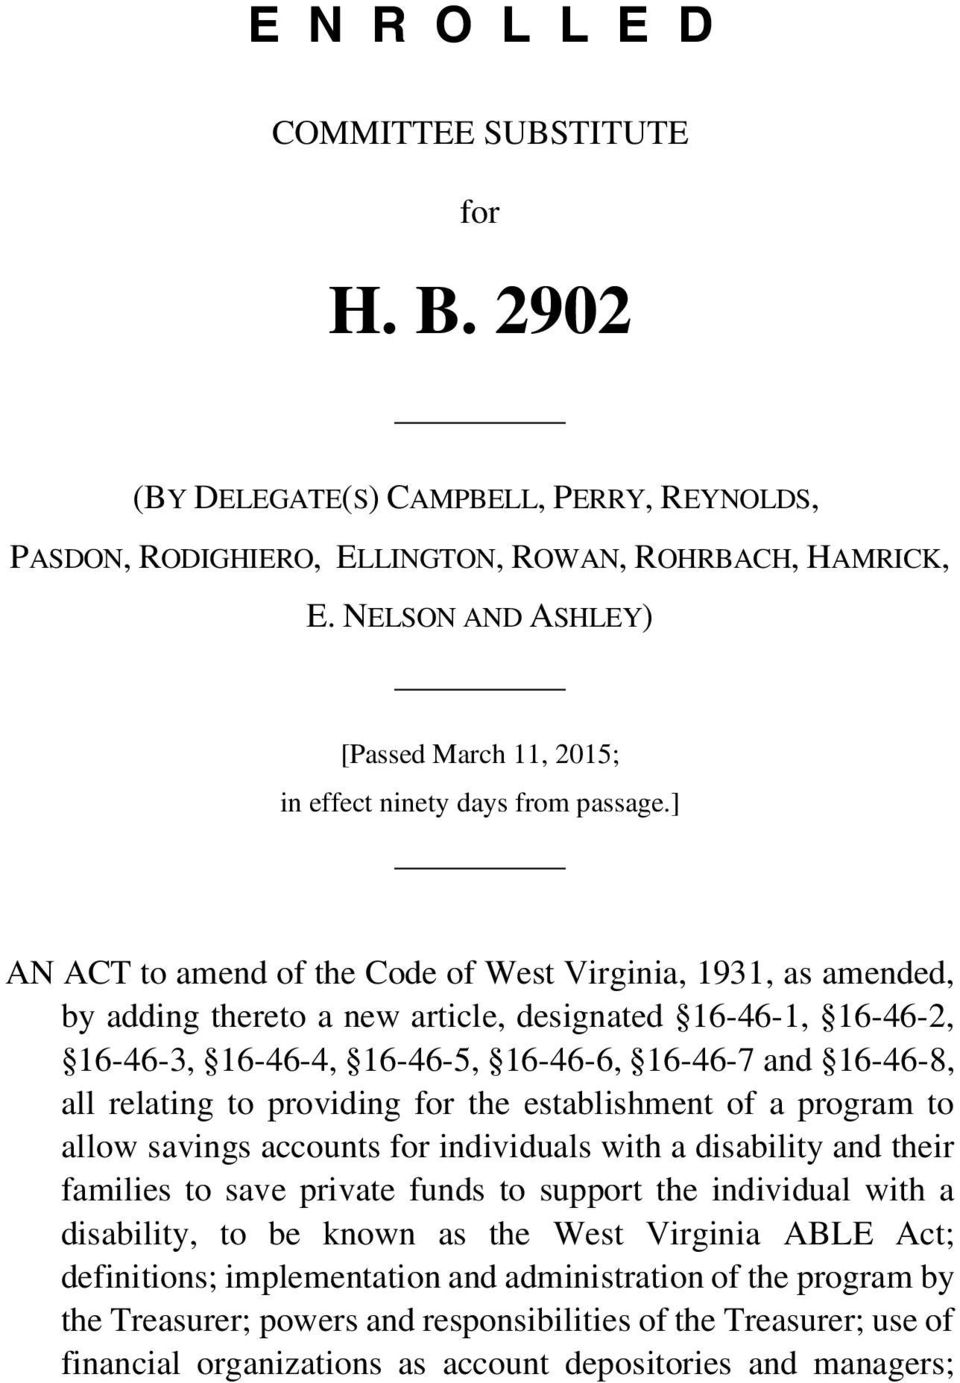 ] AN ACT to amend of the Code of West Virginia, 1931, as amended, by adding thereto a new article, designated 16-46-1, 16-46-2, 16-46-3, 16-46-4, 16-46-5, 16-46-6, 16-46-7 and 16-46-8, all relating